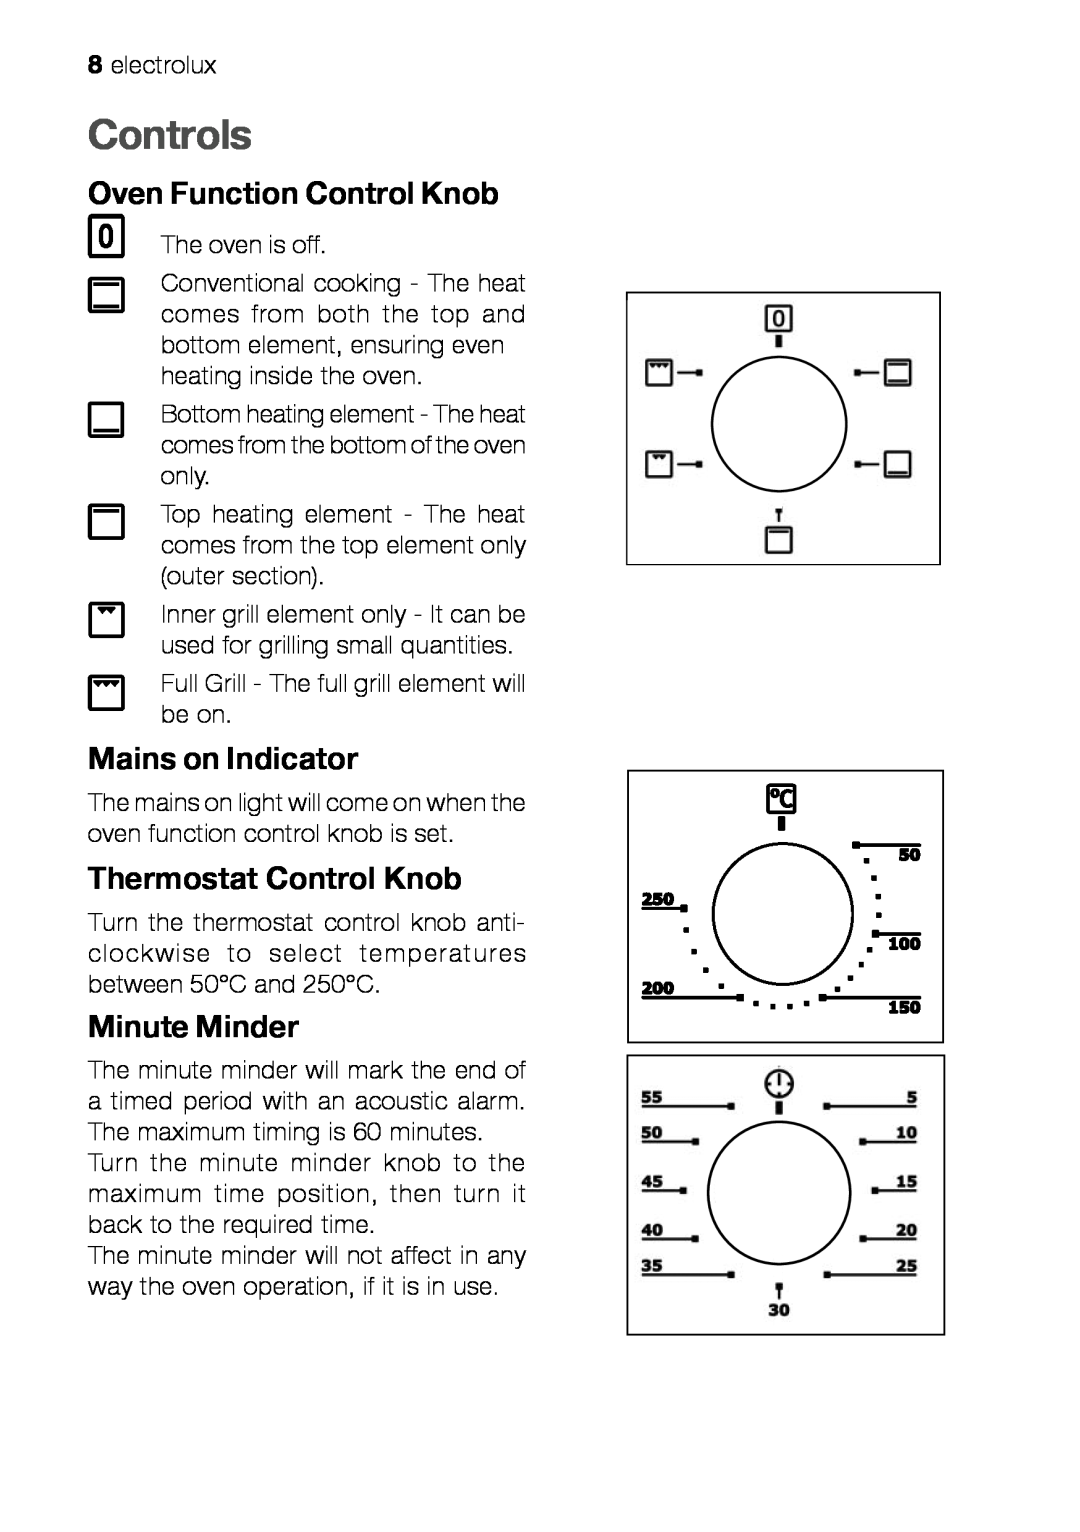 Electrolux EOB 21001 Controls, Oven Function Control Knob, Mains on Indicator, Thermostat Control Knob, Minute Minder 